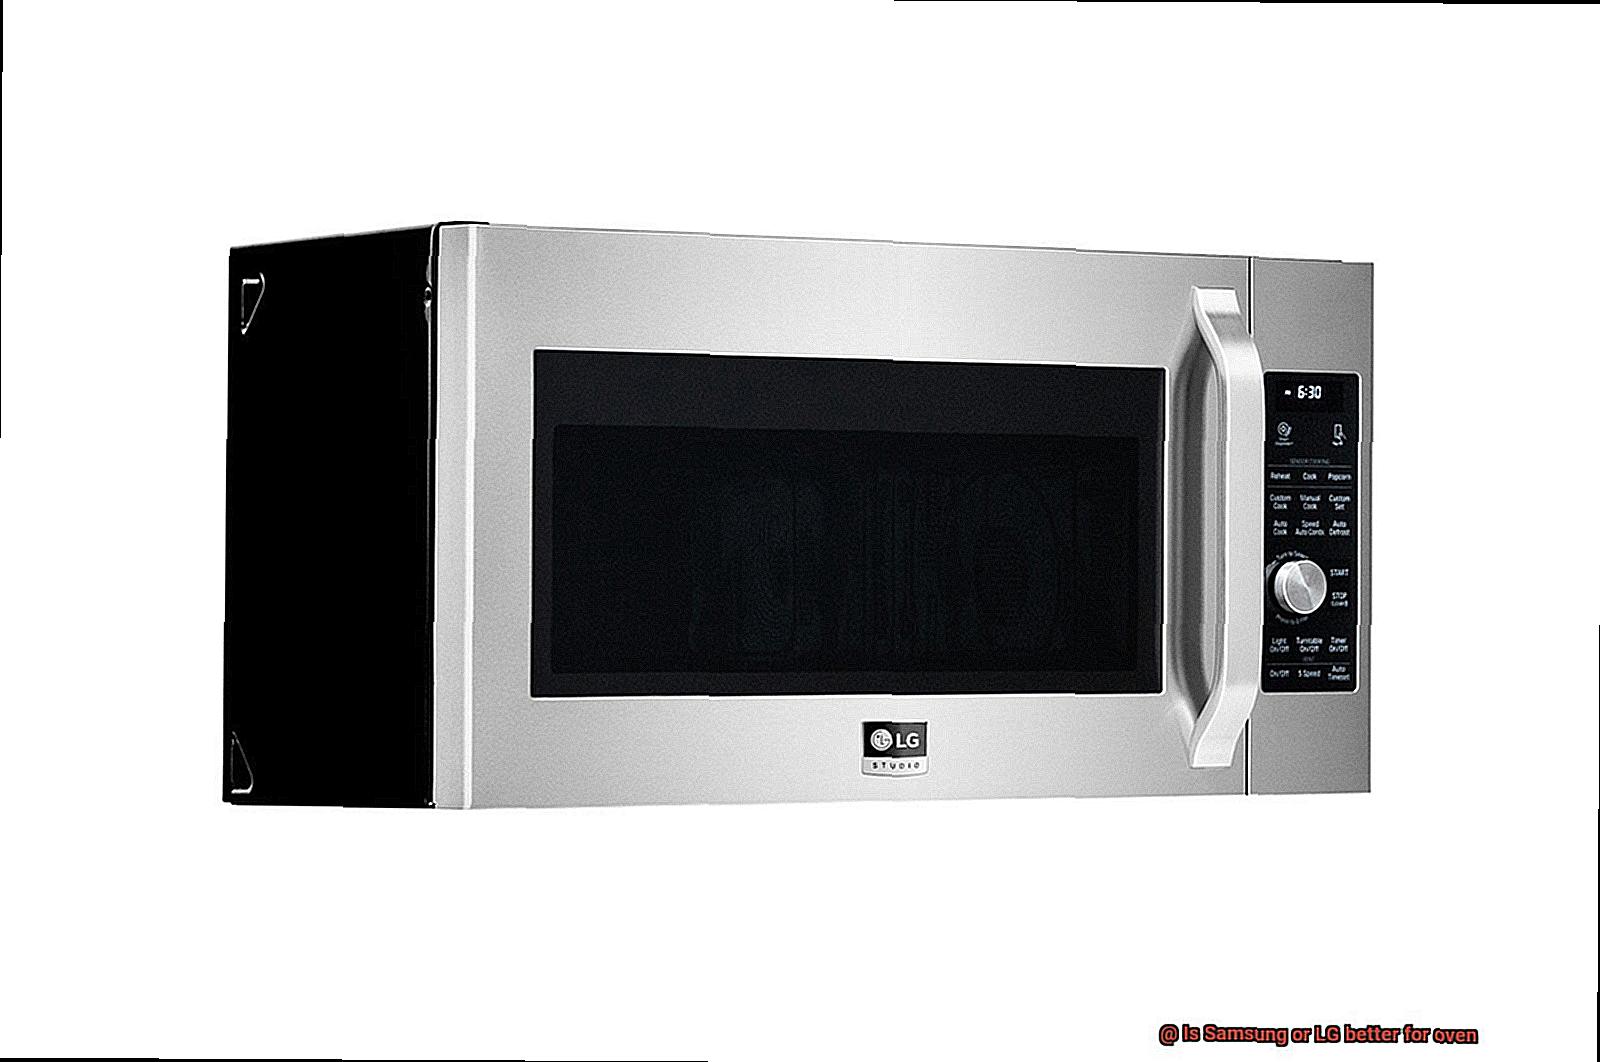 Is Samsung or LG better for oven-7